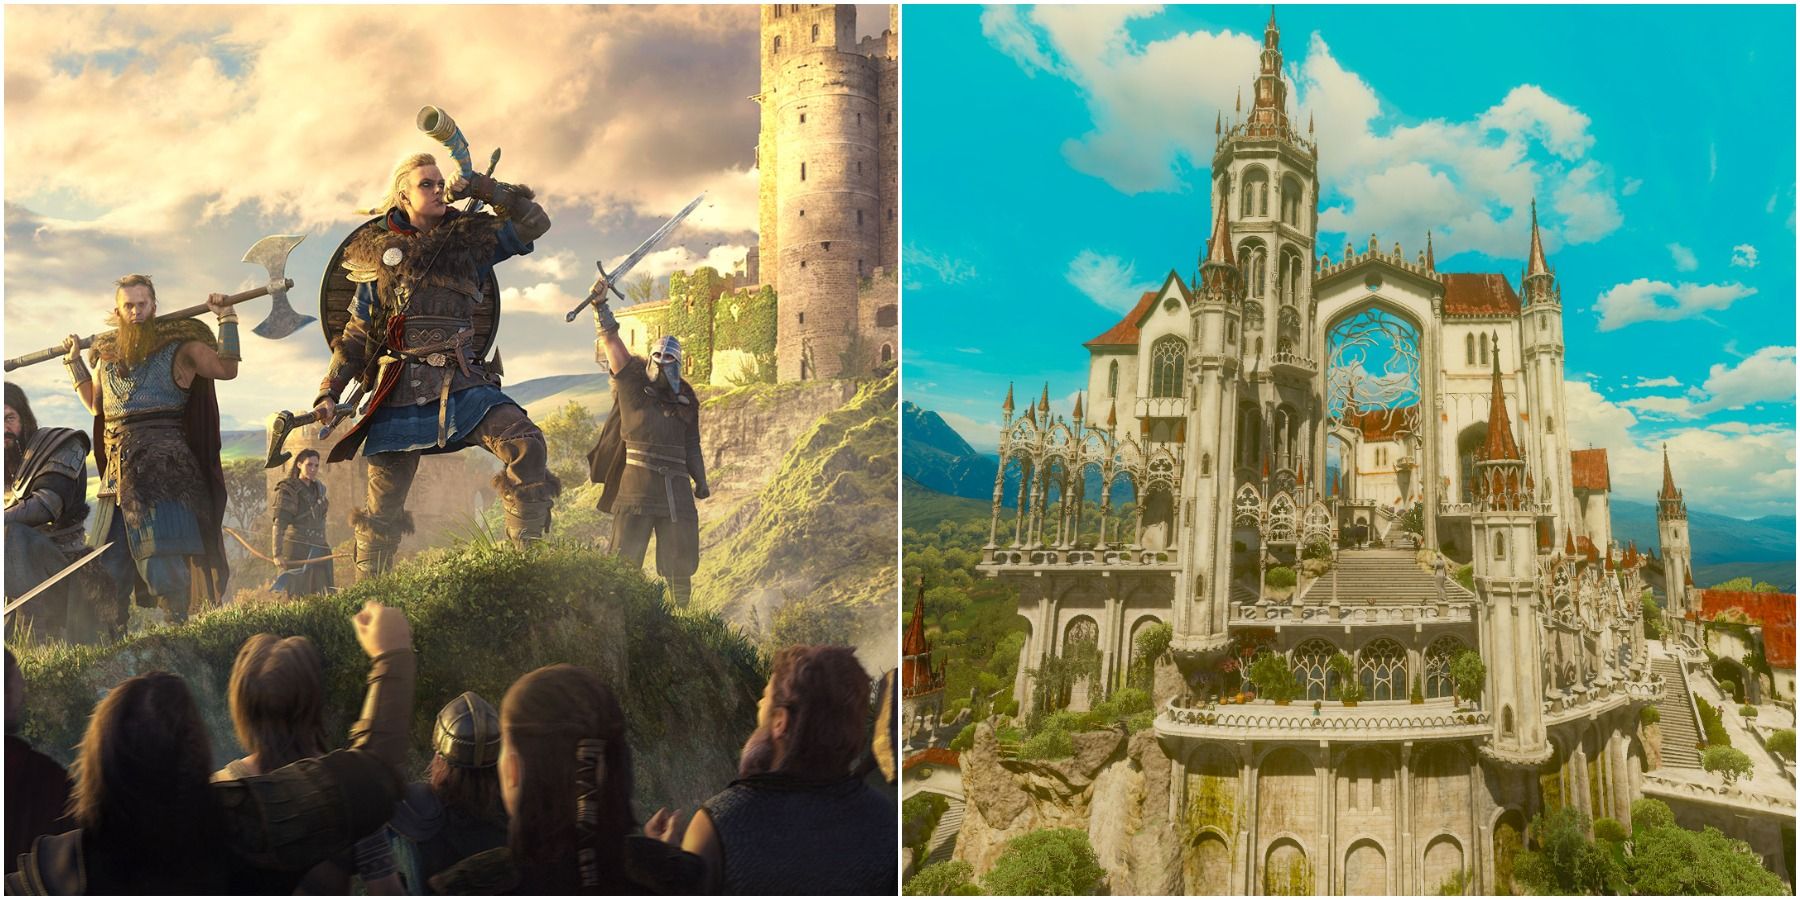 (Left) Characters cheering in Assassin's Creed: Valhalla (Right) Castle in The Witcher 3